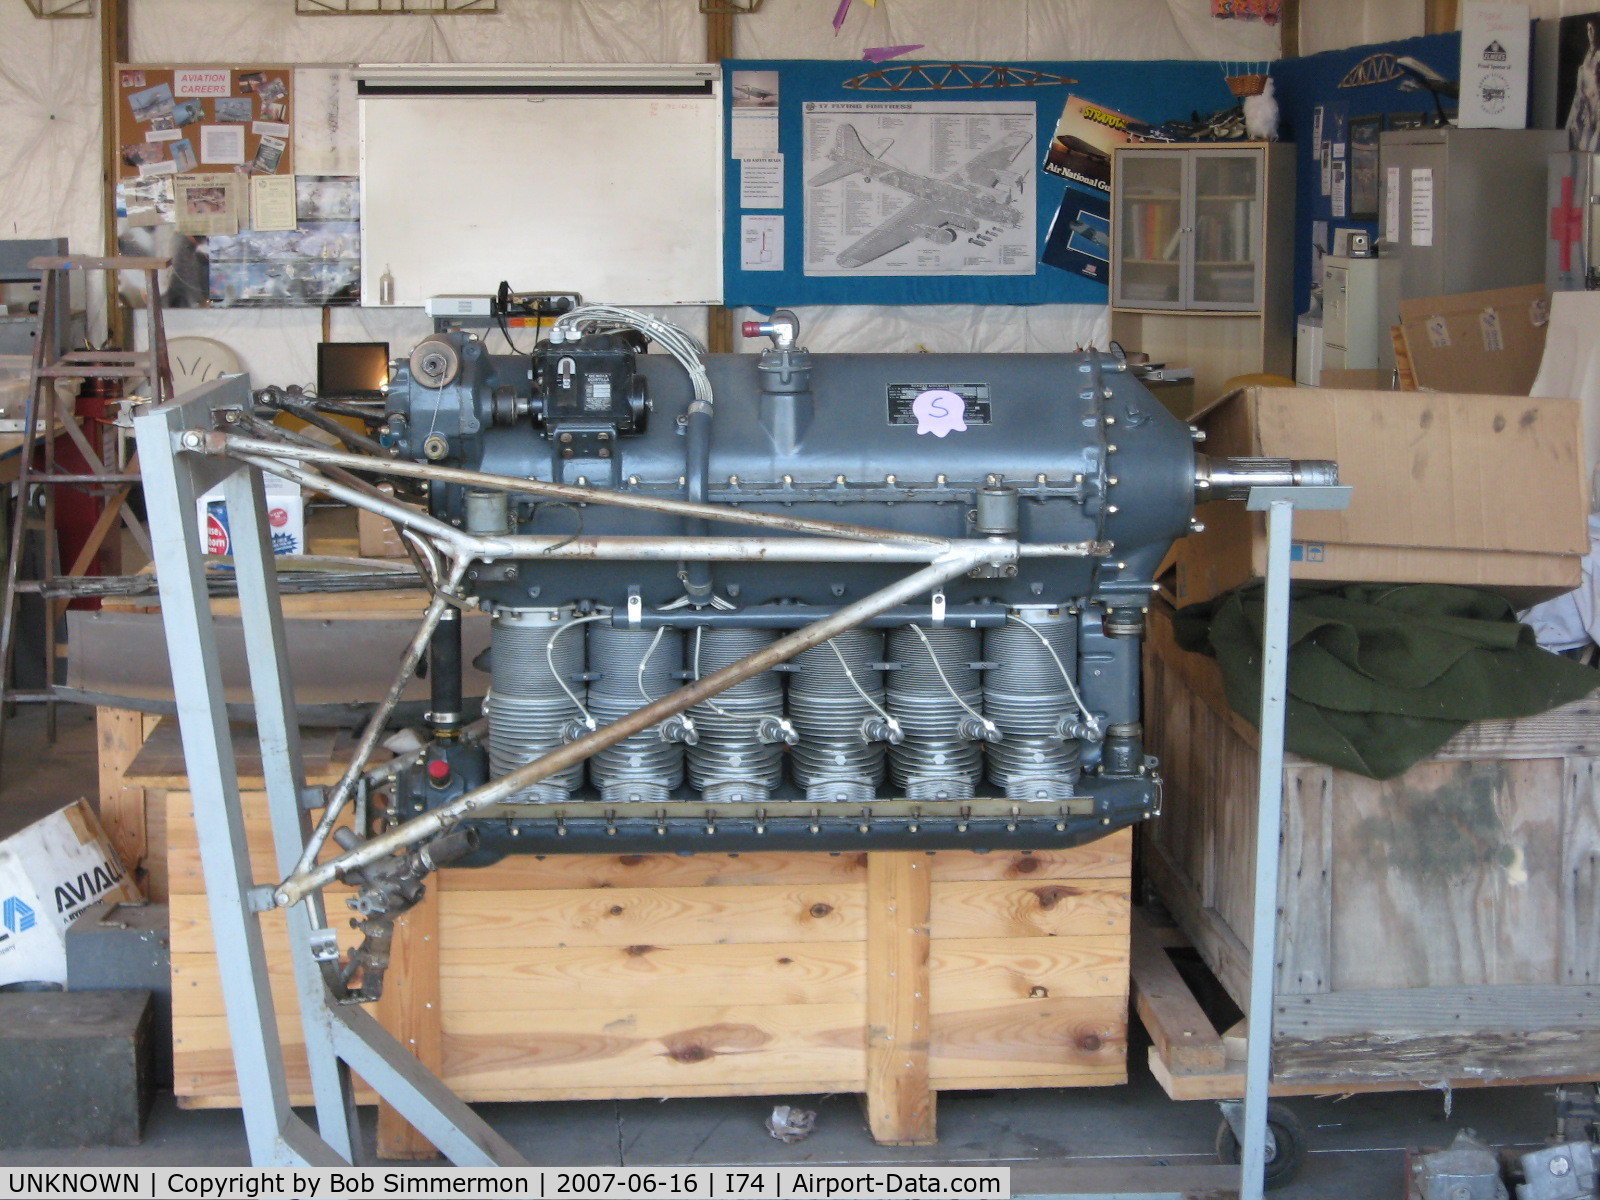 UNKNOWN, , Ranger engine for Fairchild 24 project at Urbana, OH